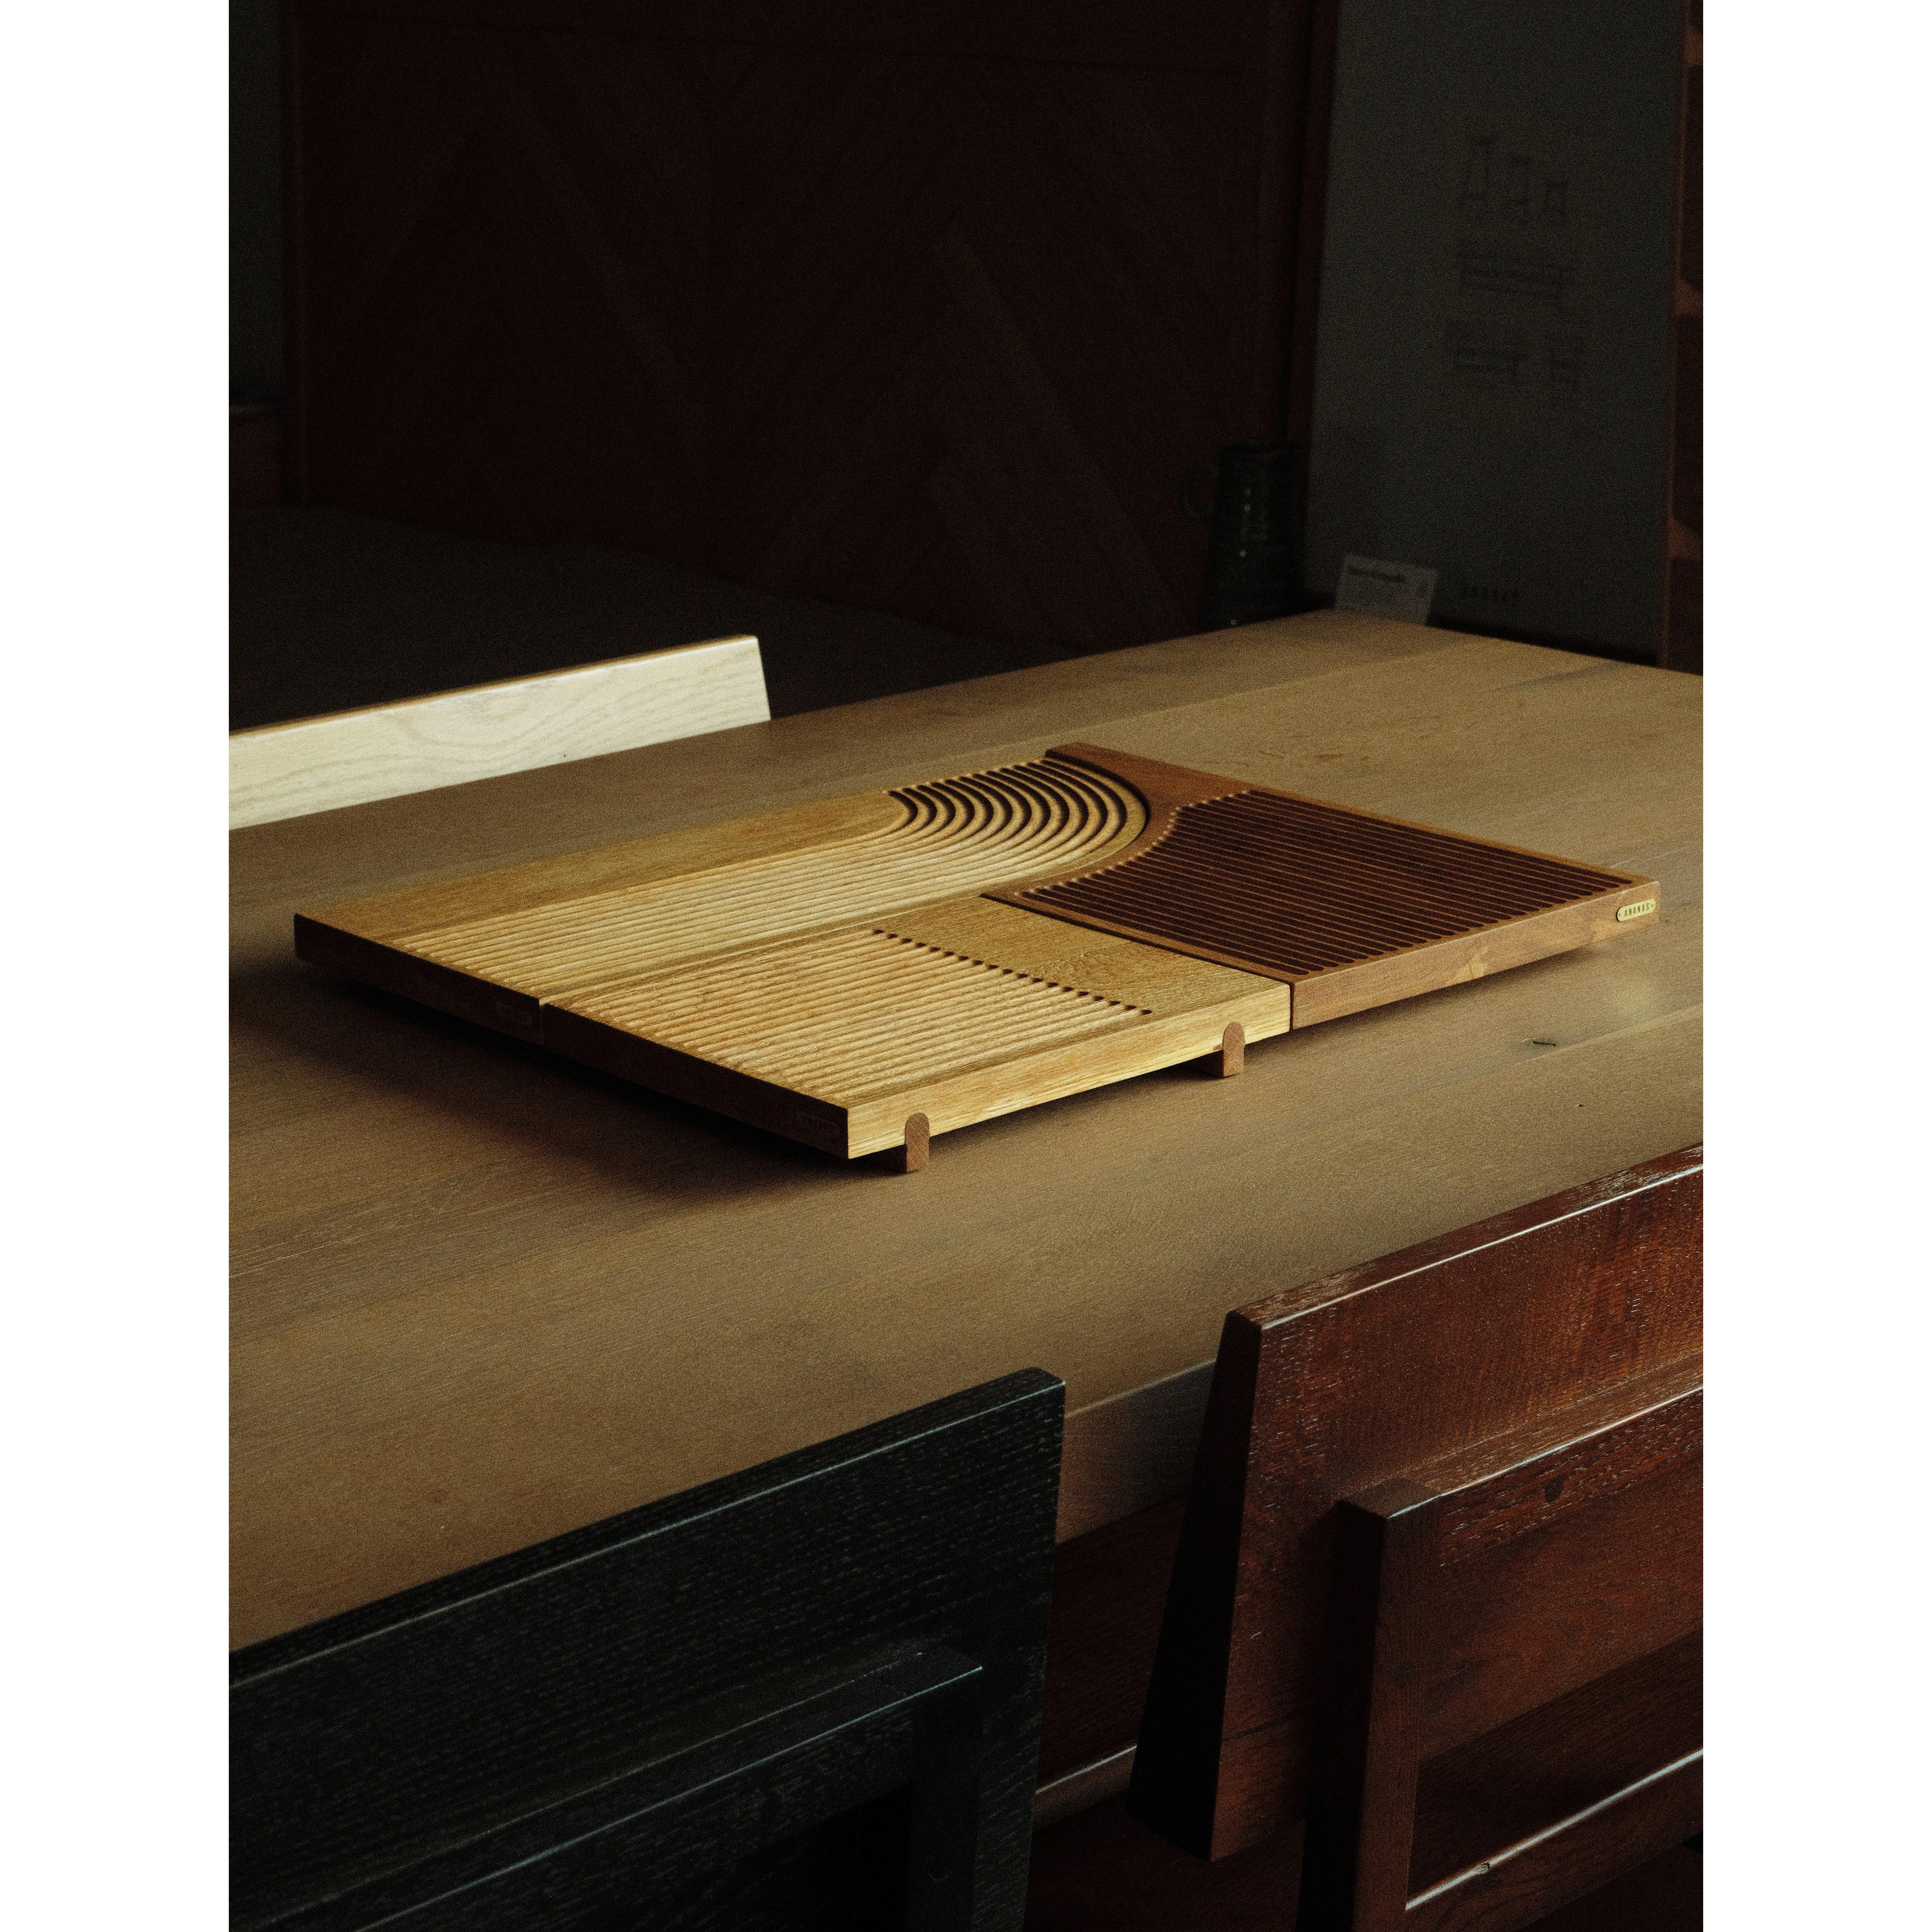 Ananas table set is made from solid oak wood all with precision and craftsmanship. The set includes three pieces of serving trays with different sizes and forms. With the arrangements of the channels on its surface, it prevents the liquid of food